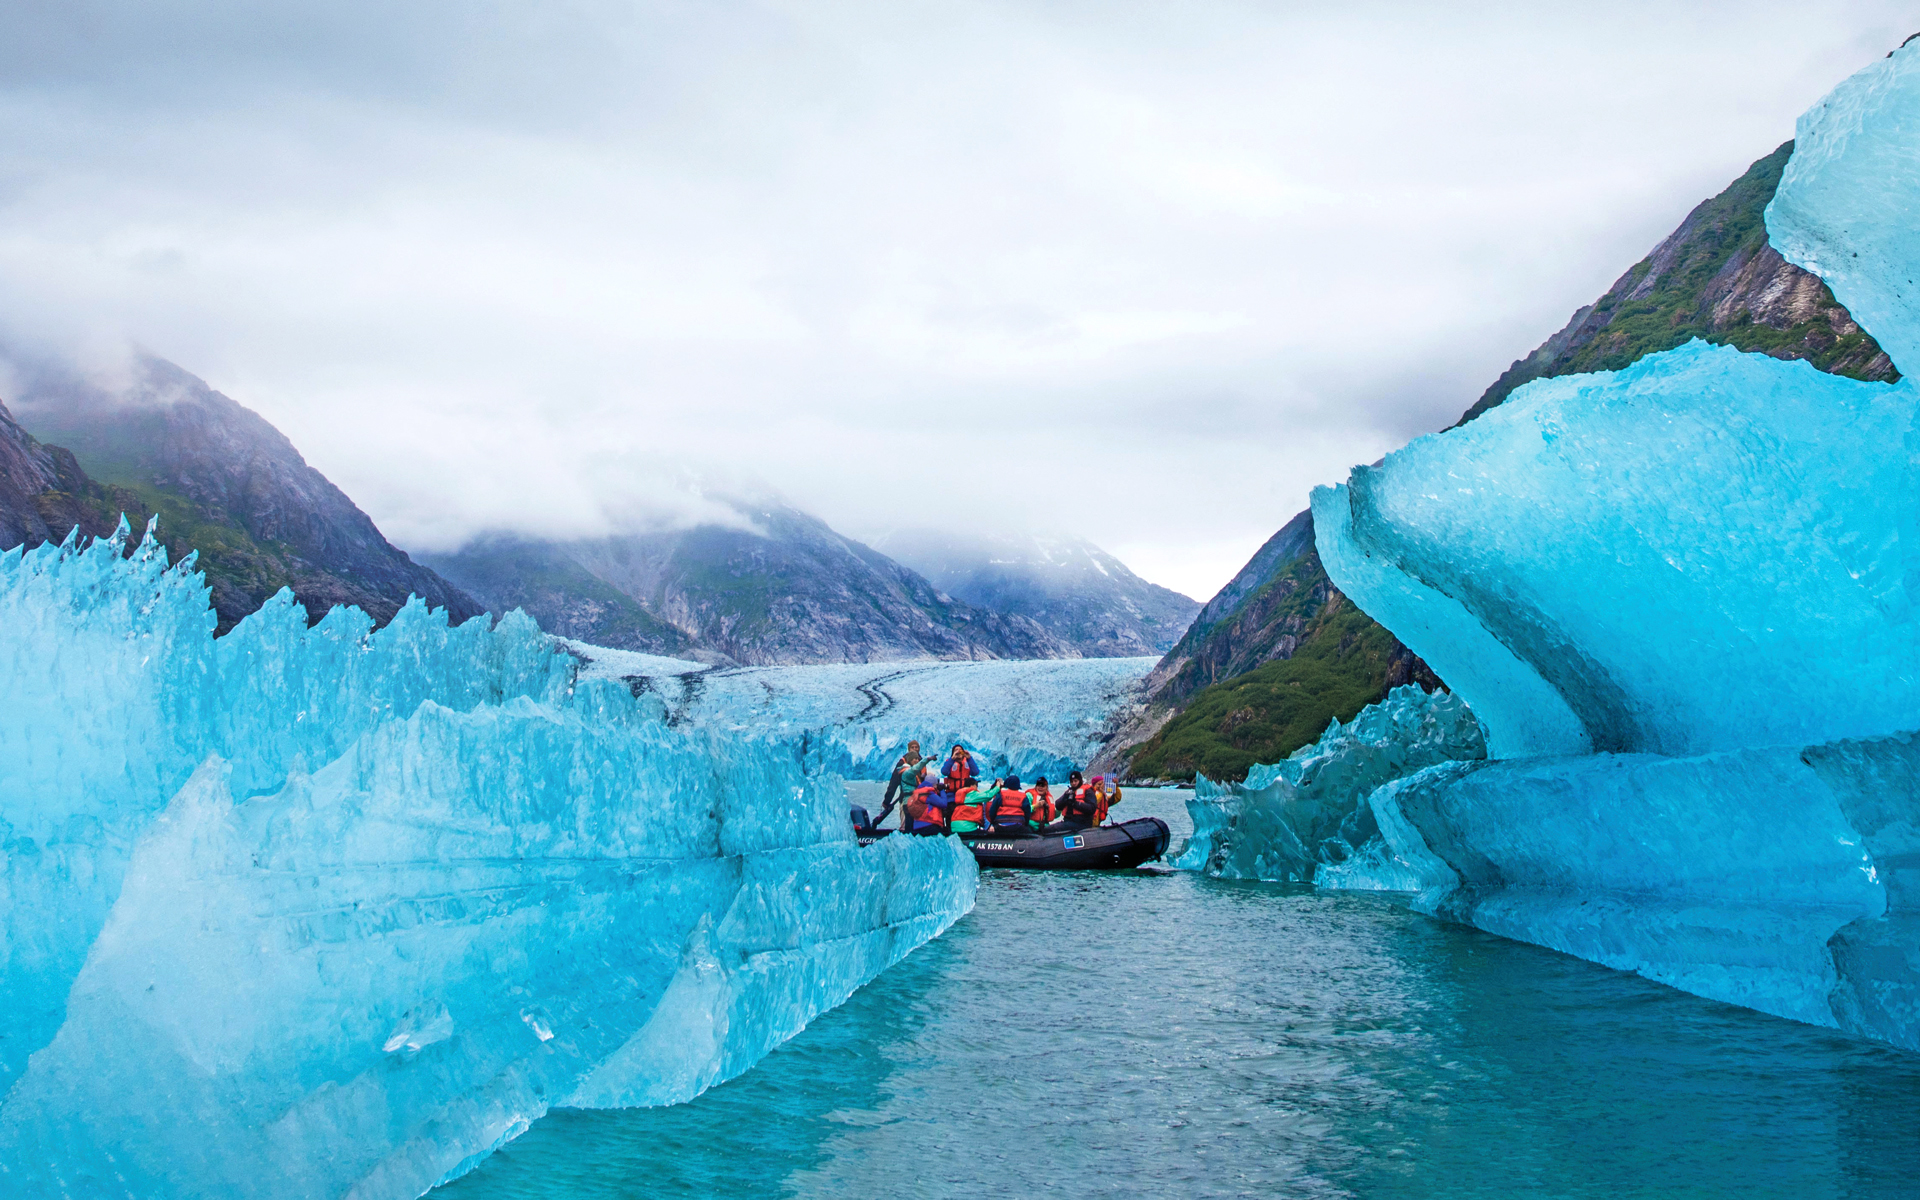 Travelers in a skiff seen dwarfed by giant blue icebergs in front of them and a larger glacier in Alaska's Inside Passage behind them.